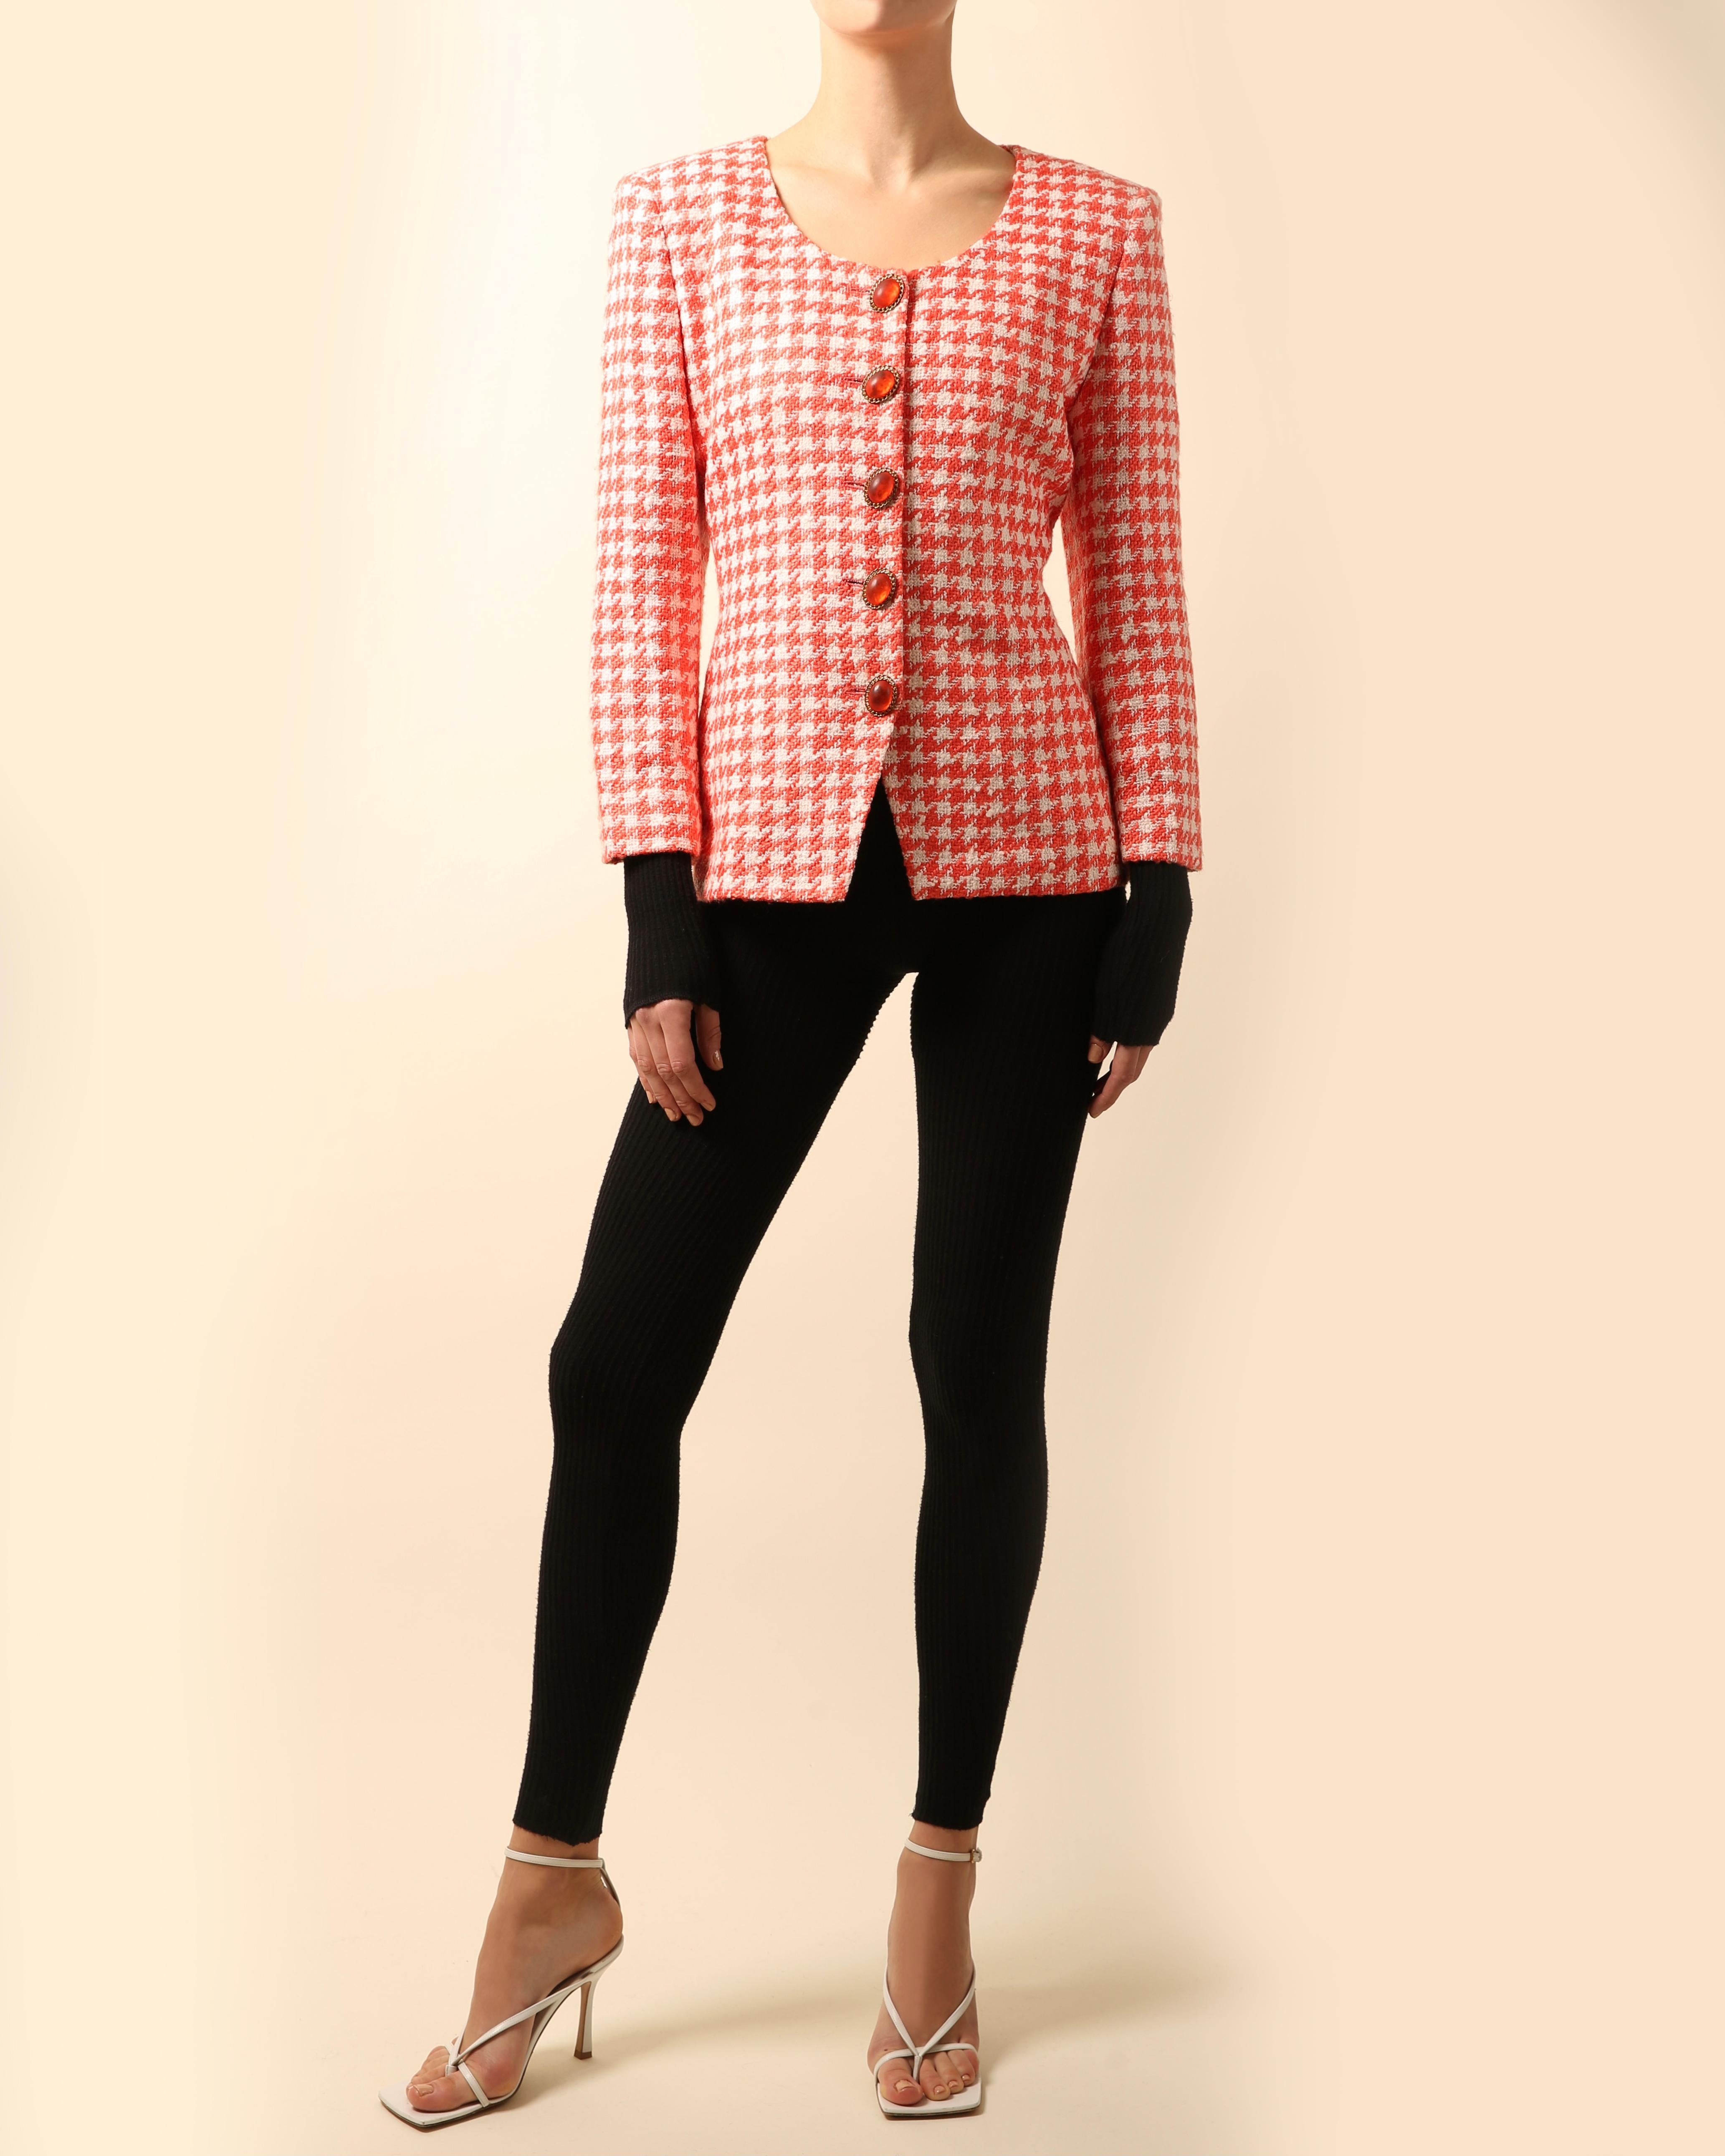 Christian Dior Vintage red white tweed gingham check print jewel blazer jacket In Excellent Condition For Sale In Paris, FR